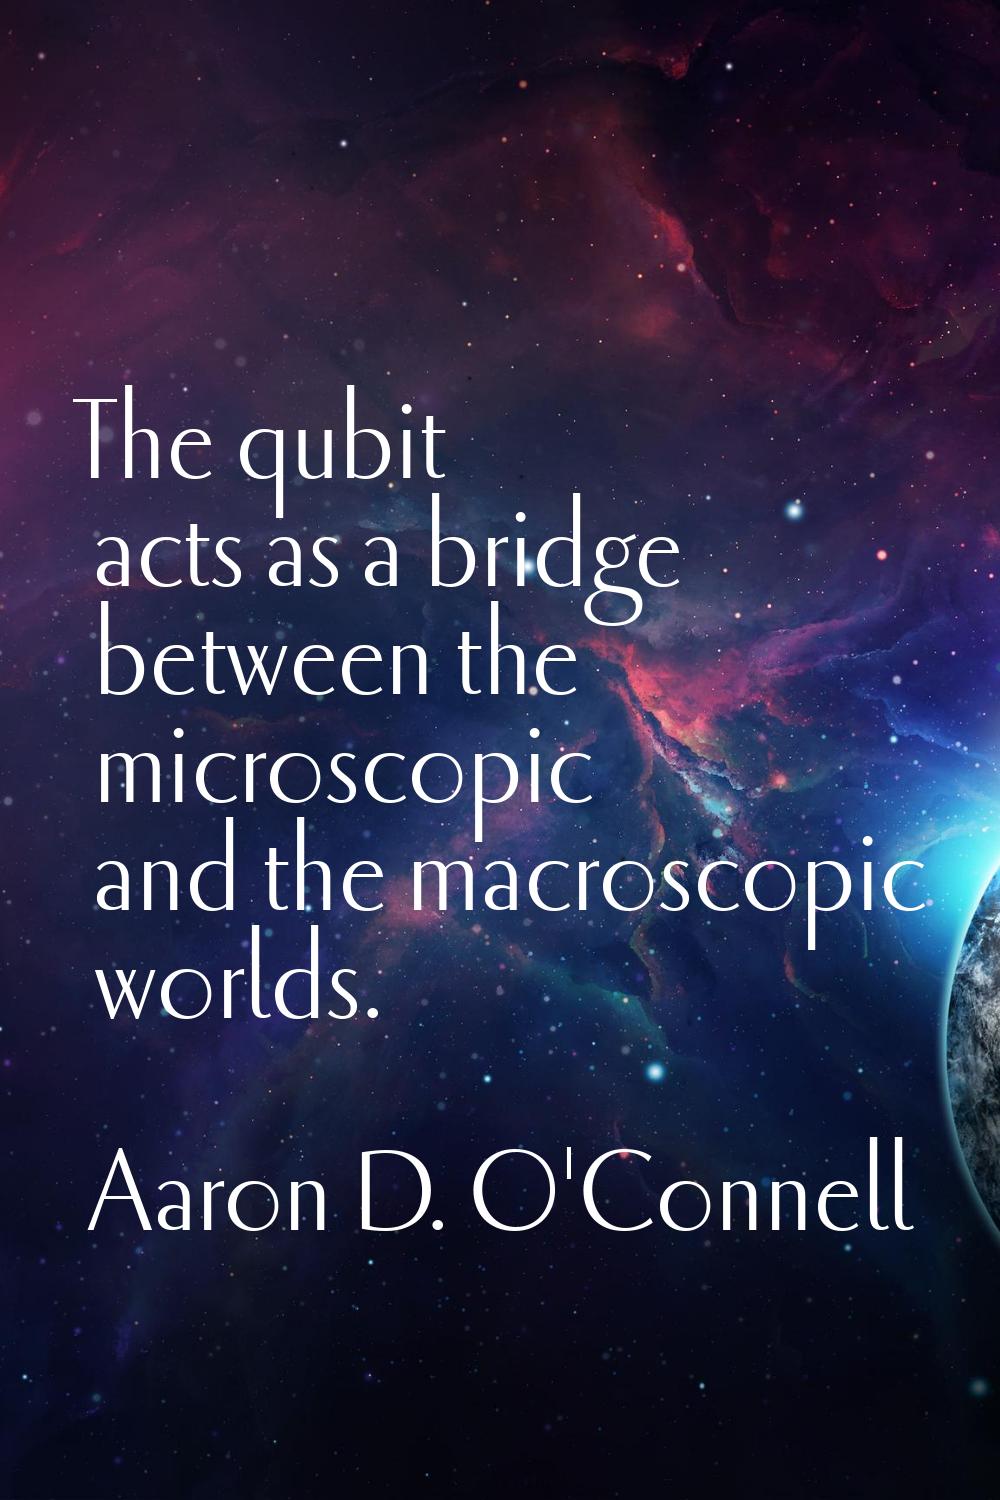 The qubit acts as a bridge between the microscopic and the macroscopic worlds.